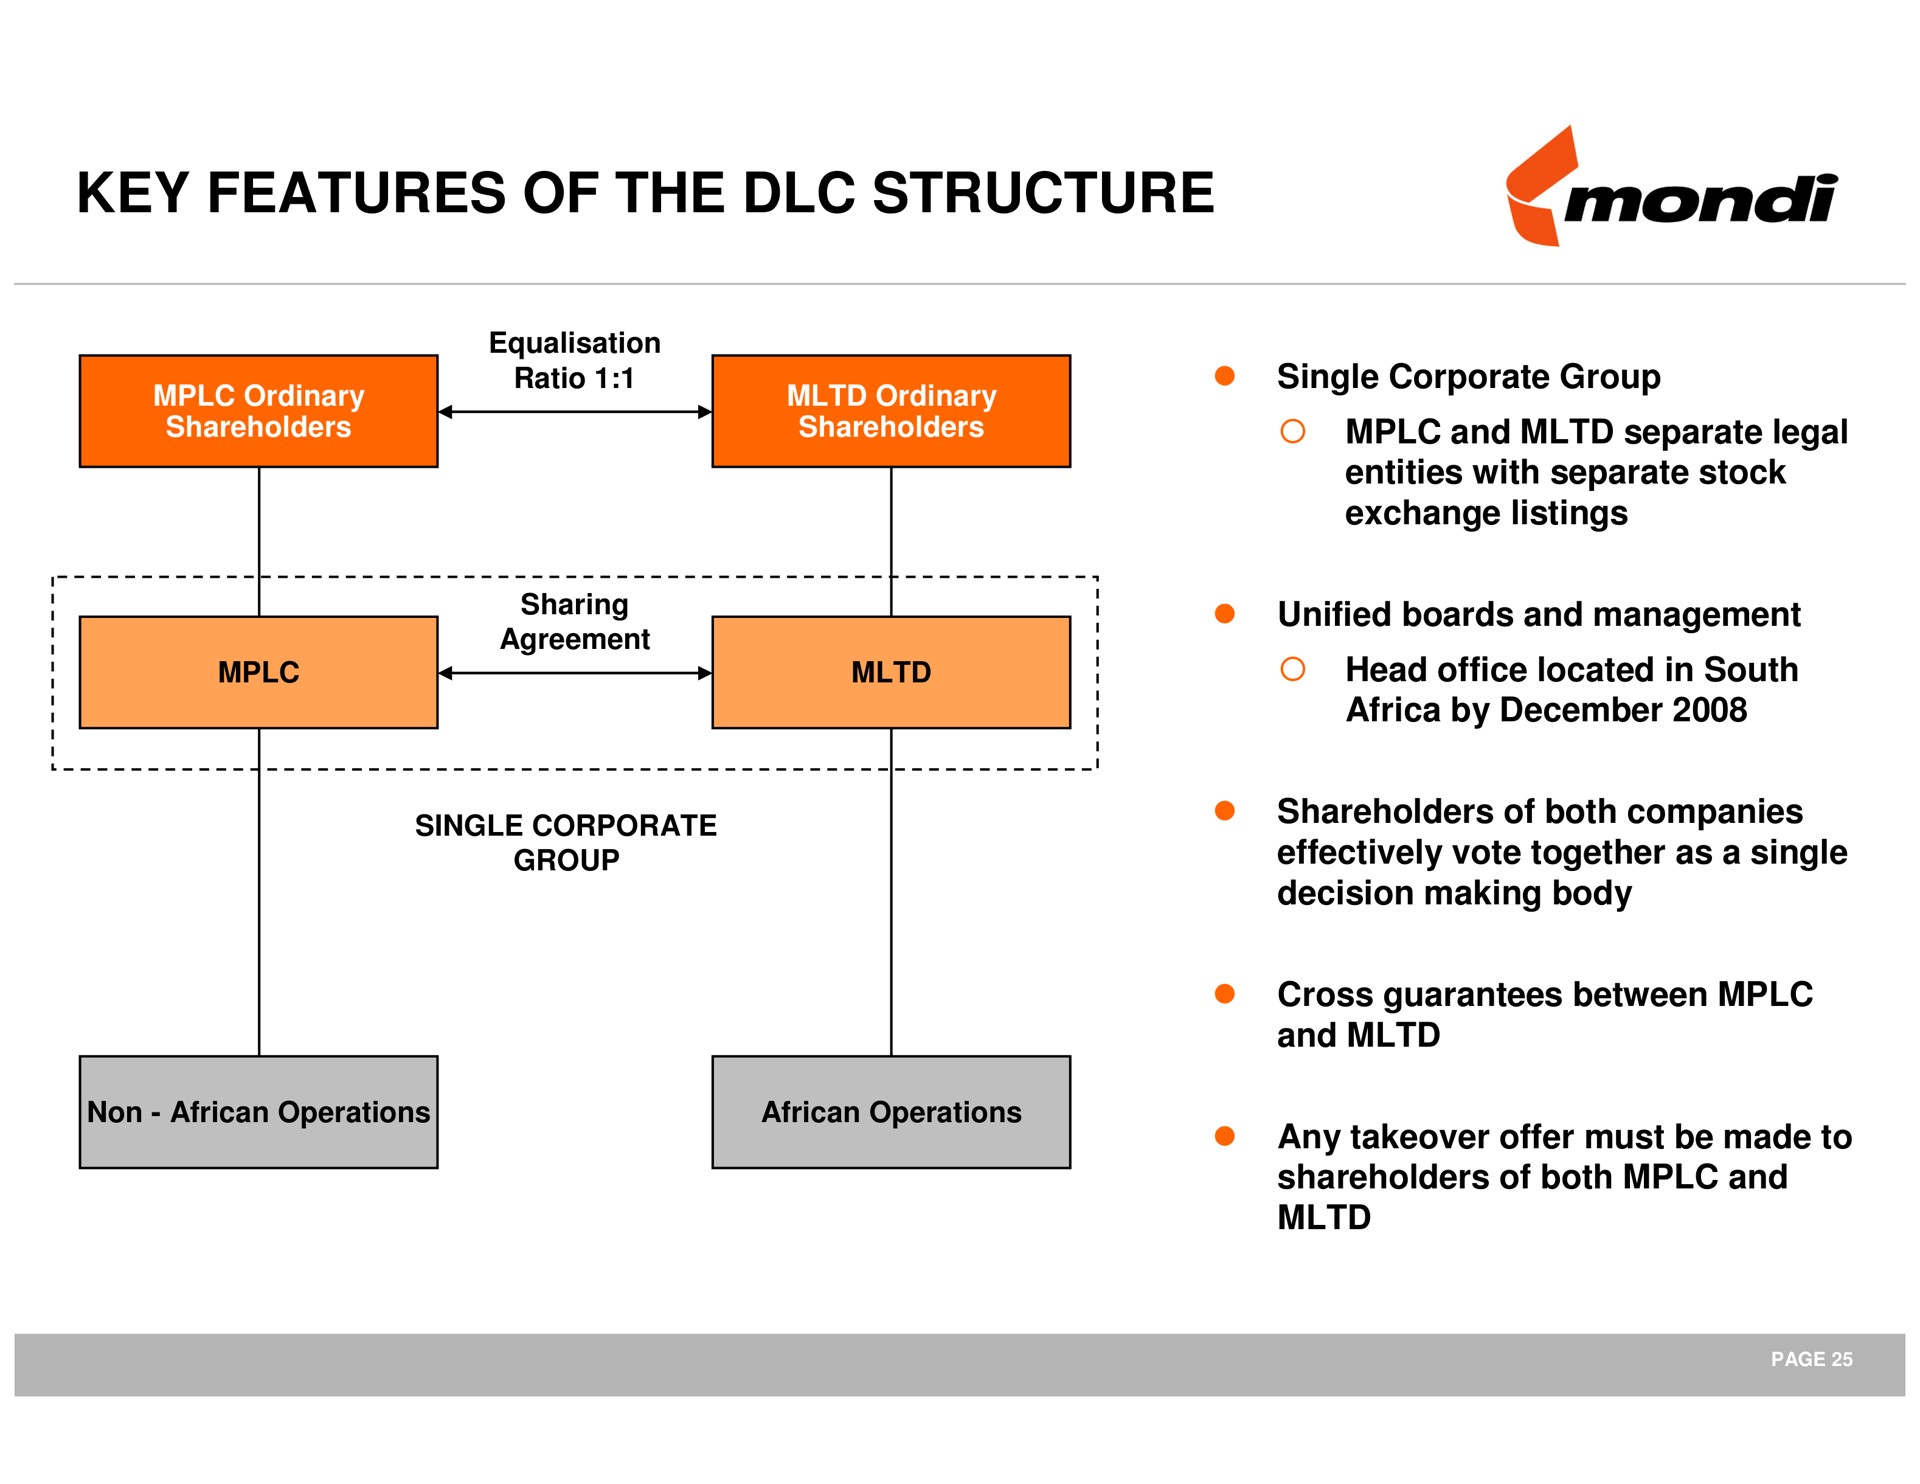 key features of the structure | Mondi